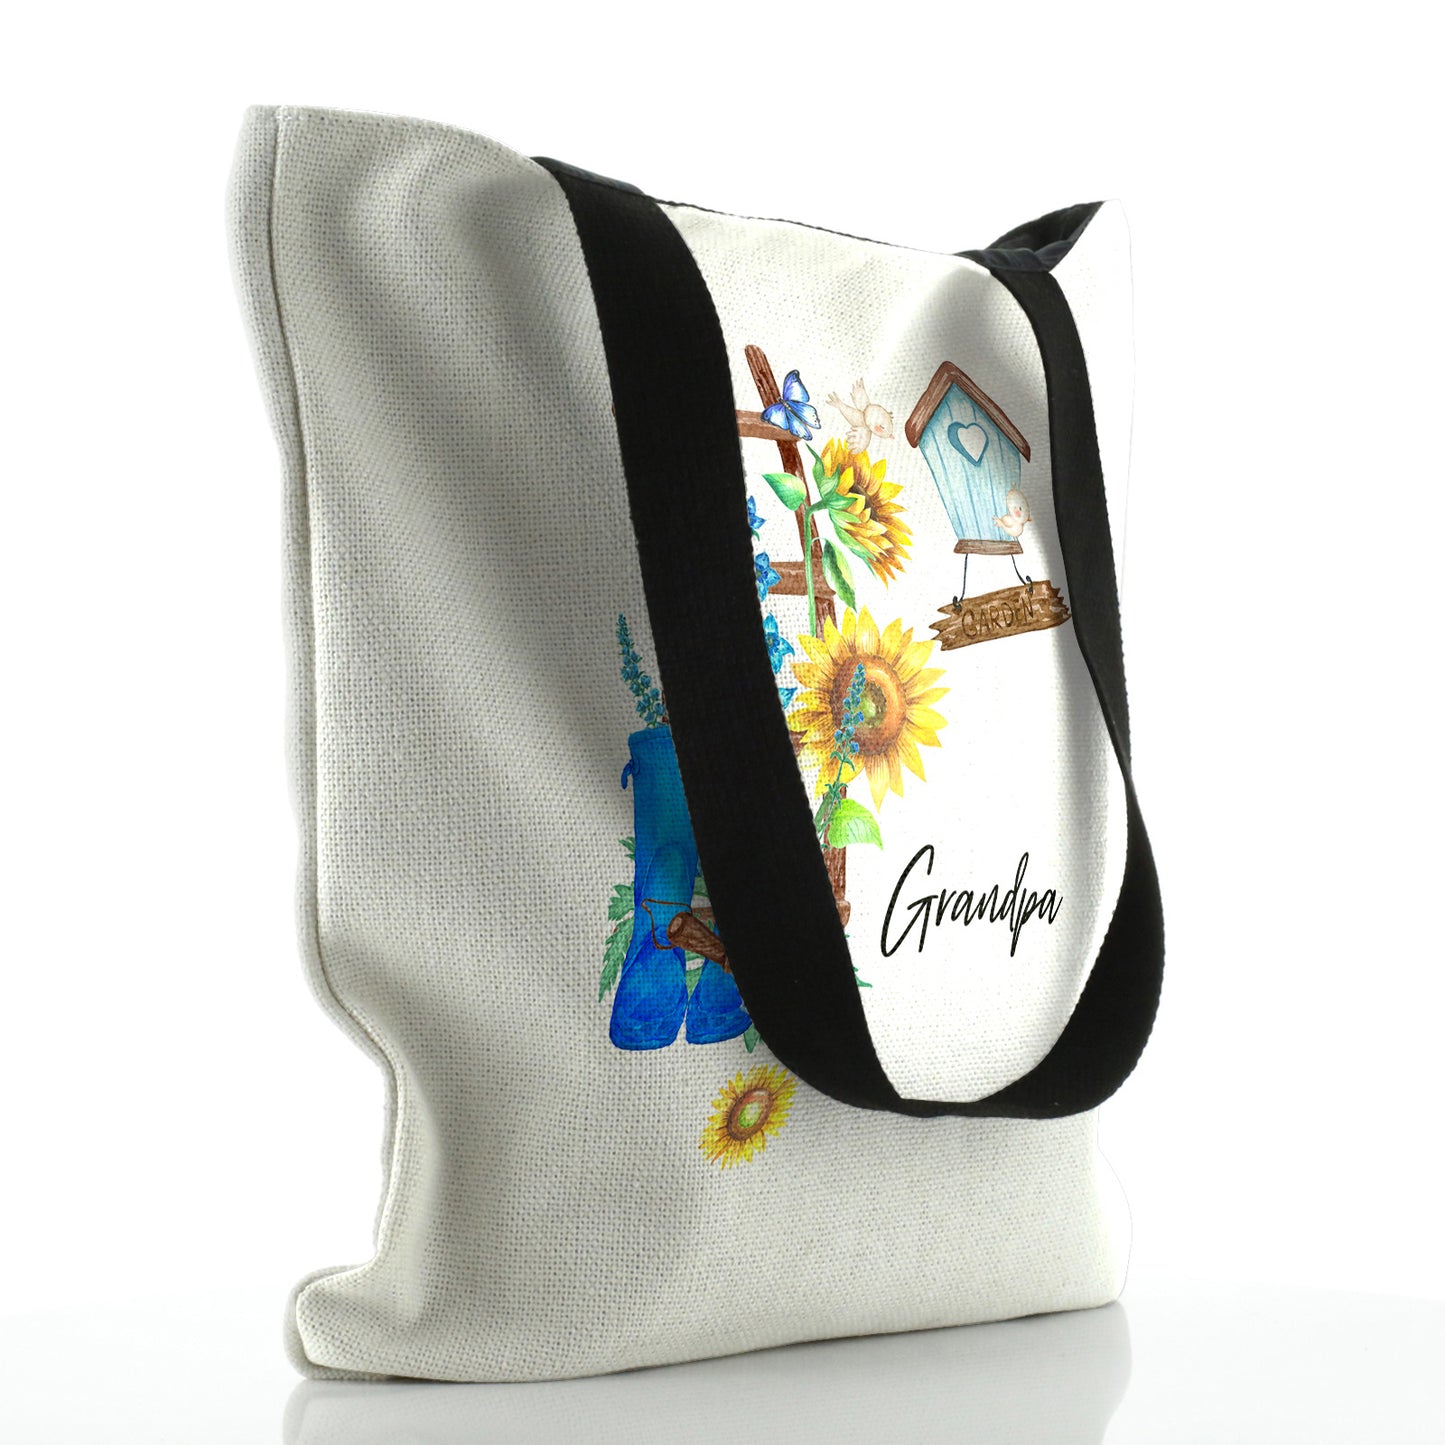 Personalised White Tote Bag with Stylish Text and Gardeners Birdbox Print